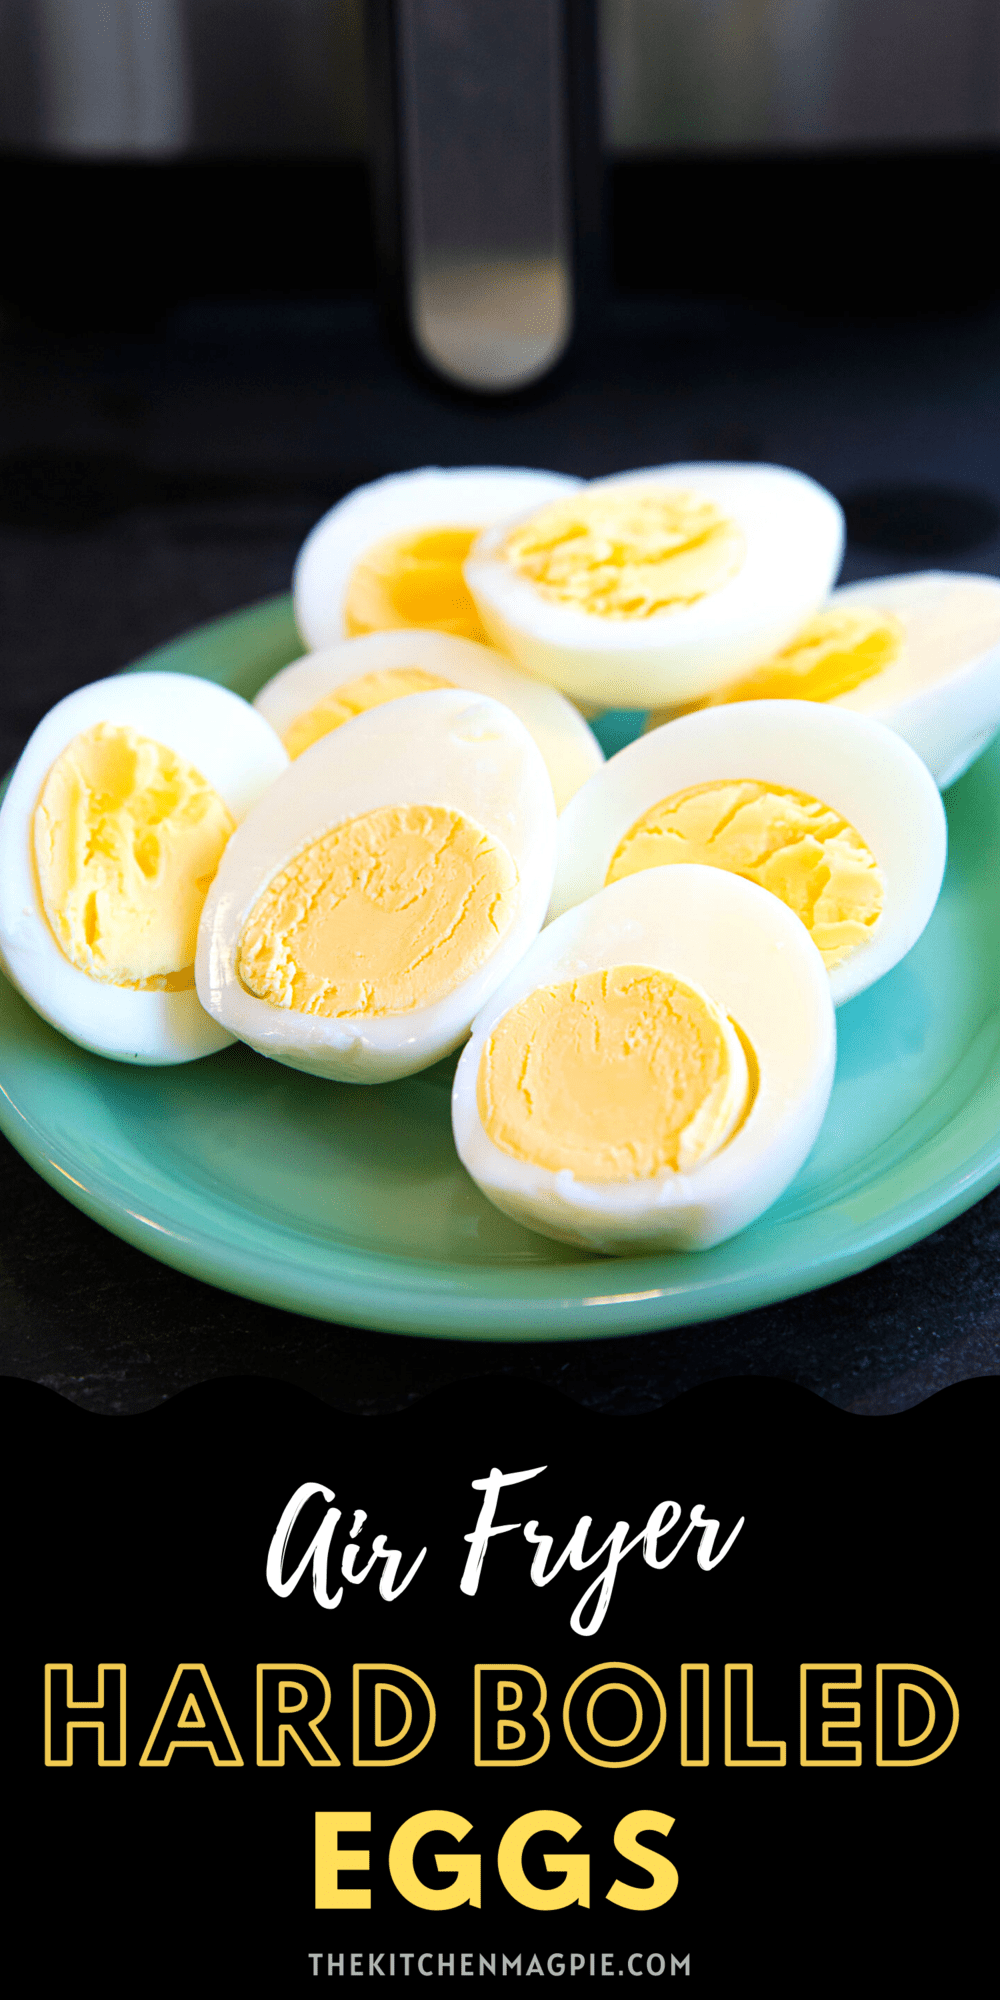 Air fryer hard boiled eggs are easy, no mess, no fuss, and NO WATER steaming up your kitchen! If you love deviled eggs and egg salad, and you have an air fryer, this is going to be a game changer for you!